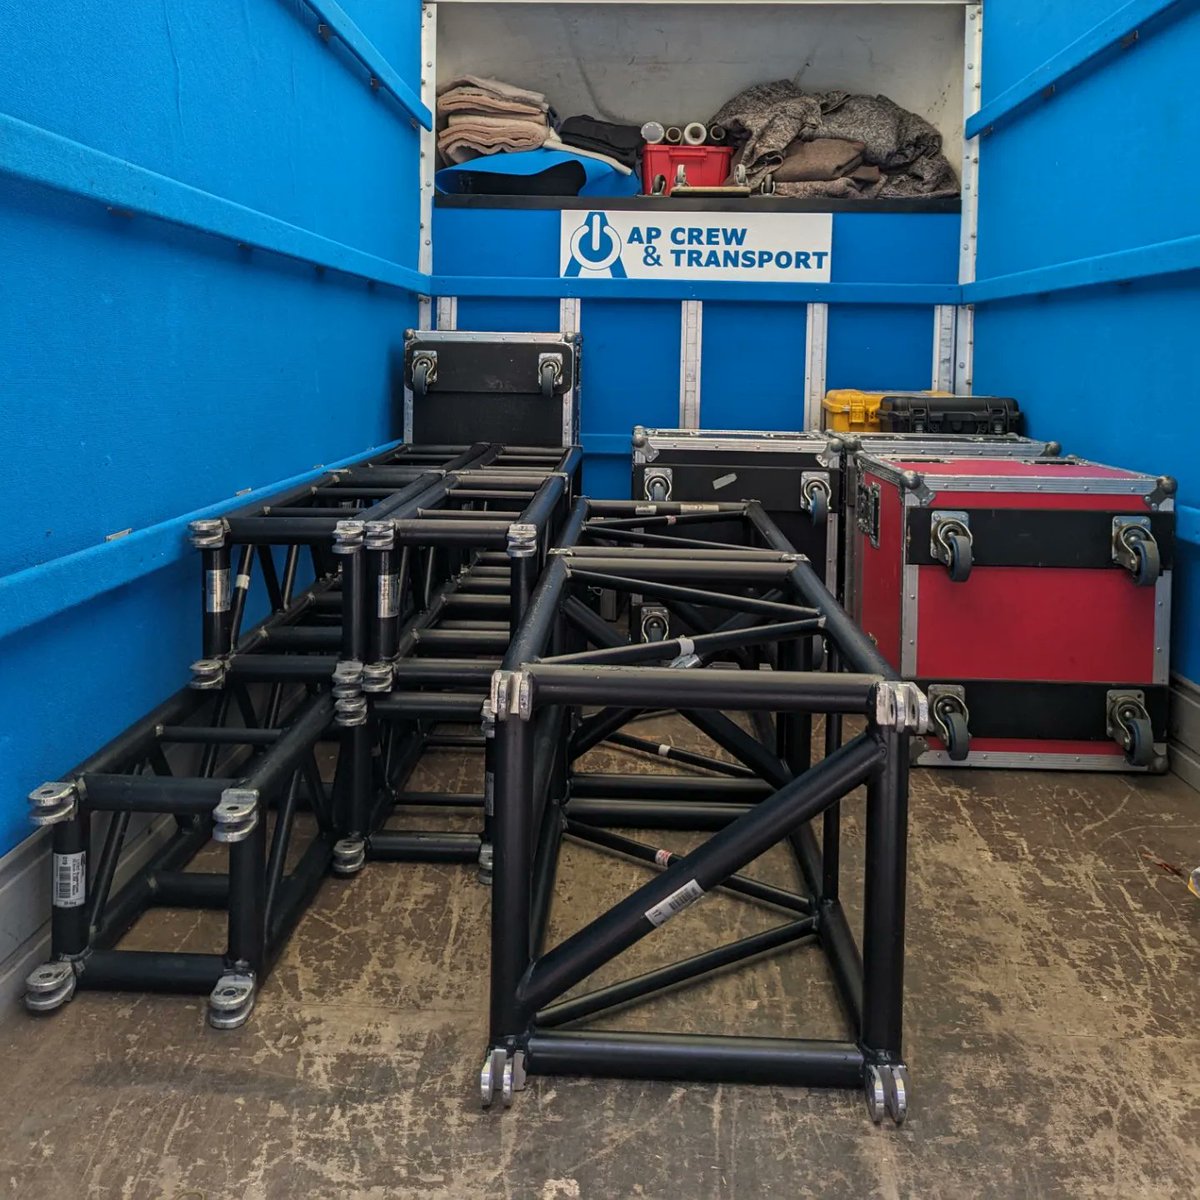 #production collection & delivery service from #london

'If it fits in the van, Yes we can'. 

#truss #flightcases #motors #rigging #lutonvan #taillift #transport #deliveries 

apcrew.co.uk